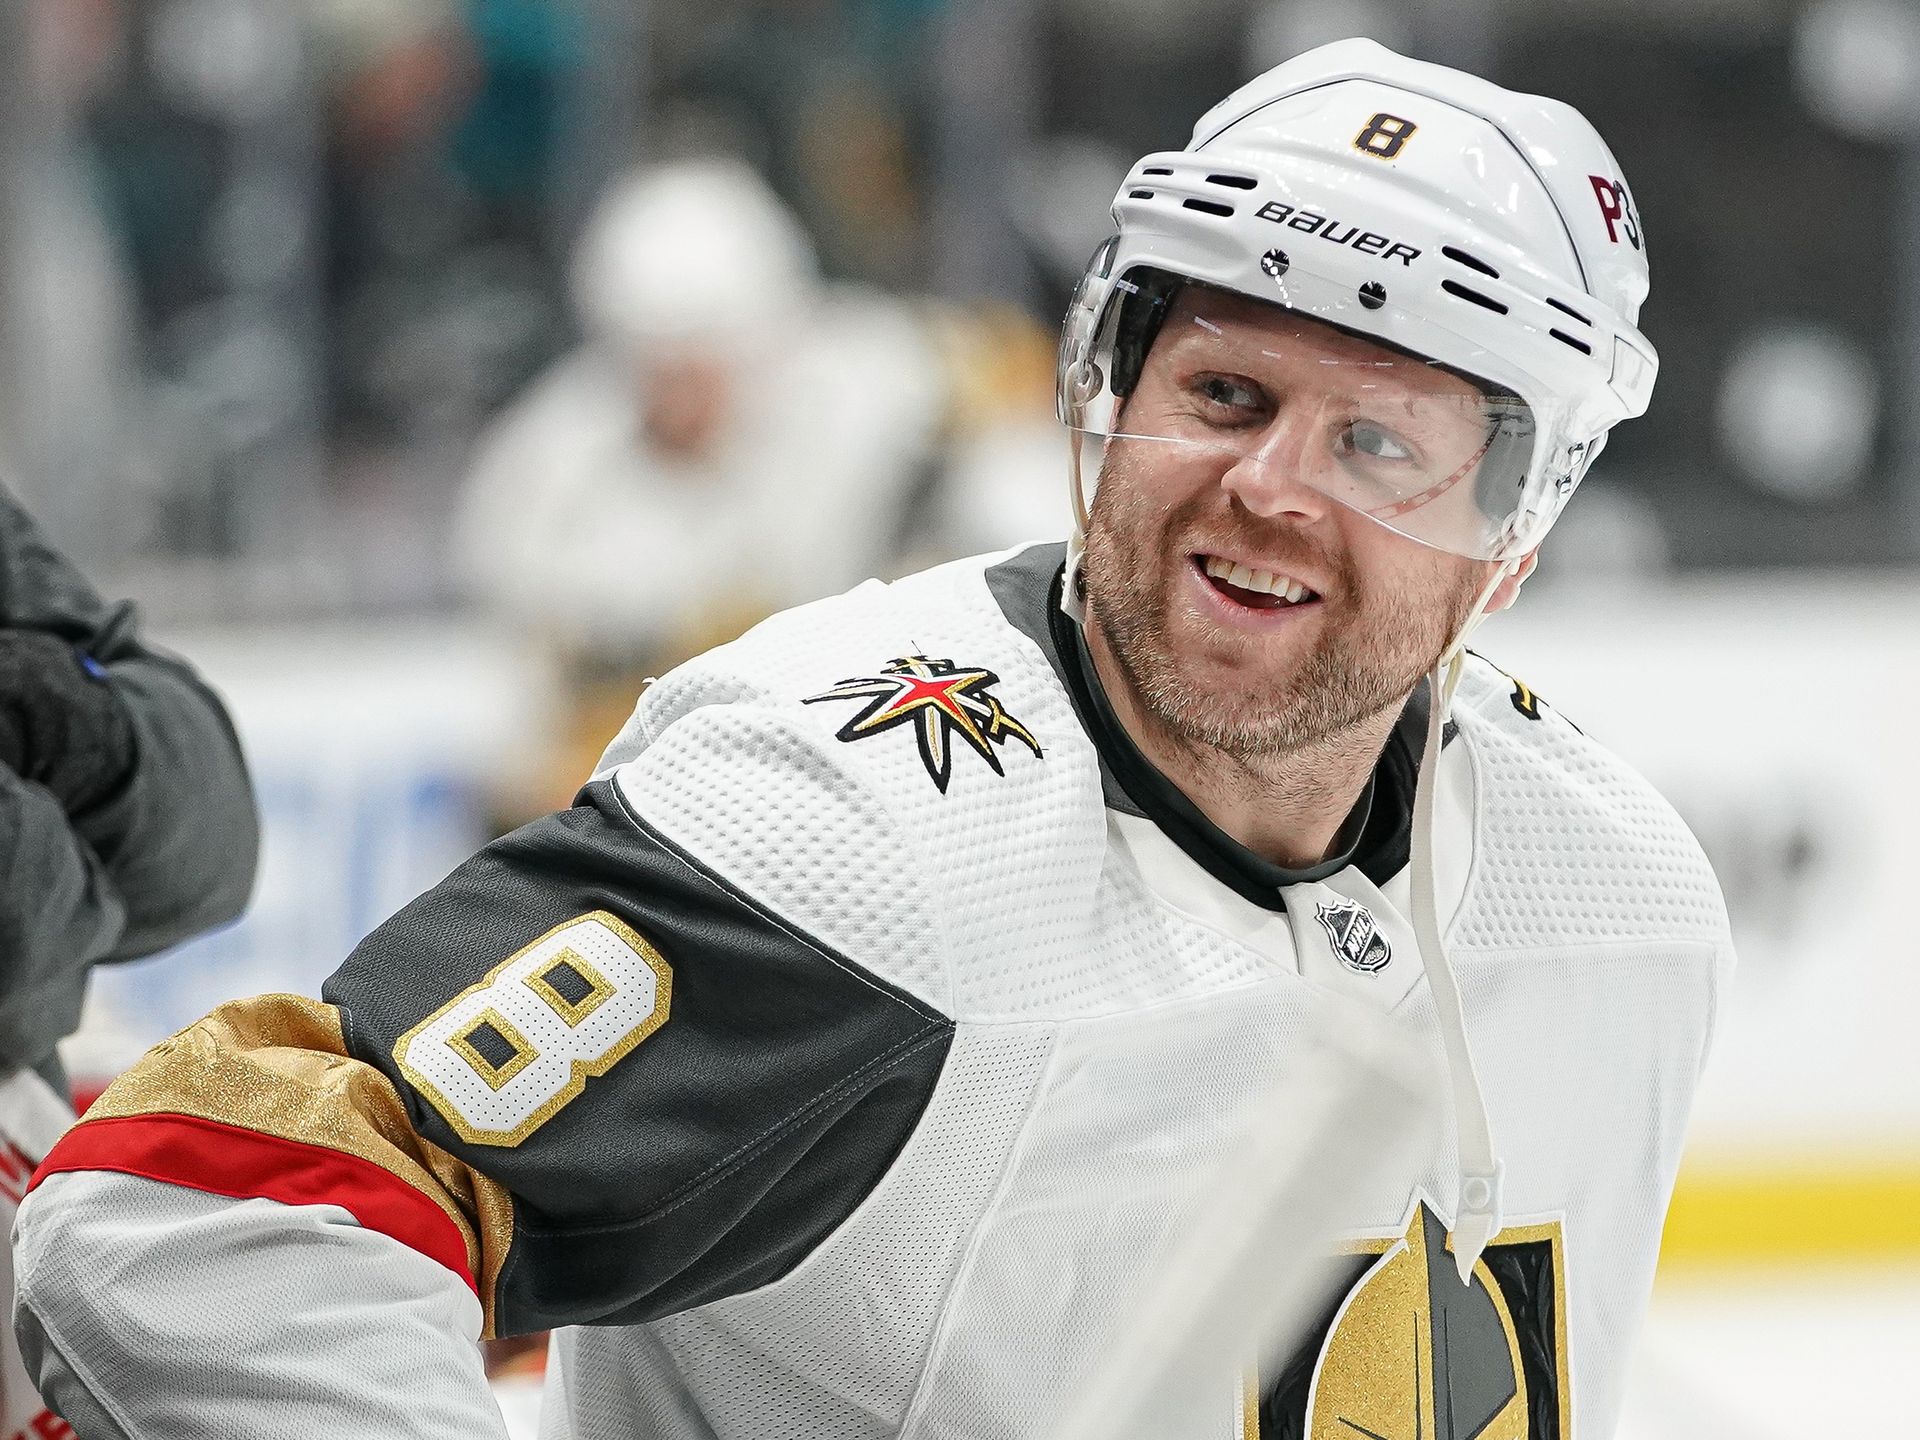 The nhl iron man phil kessel 990 consecutive games with vegas